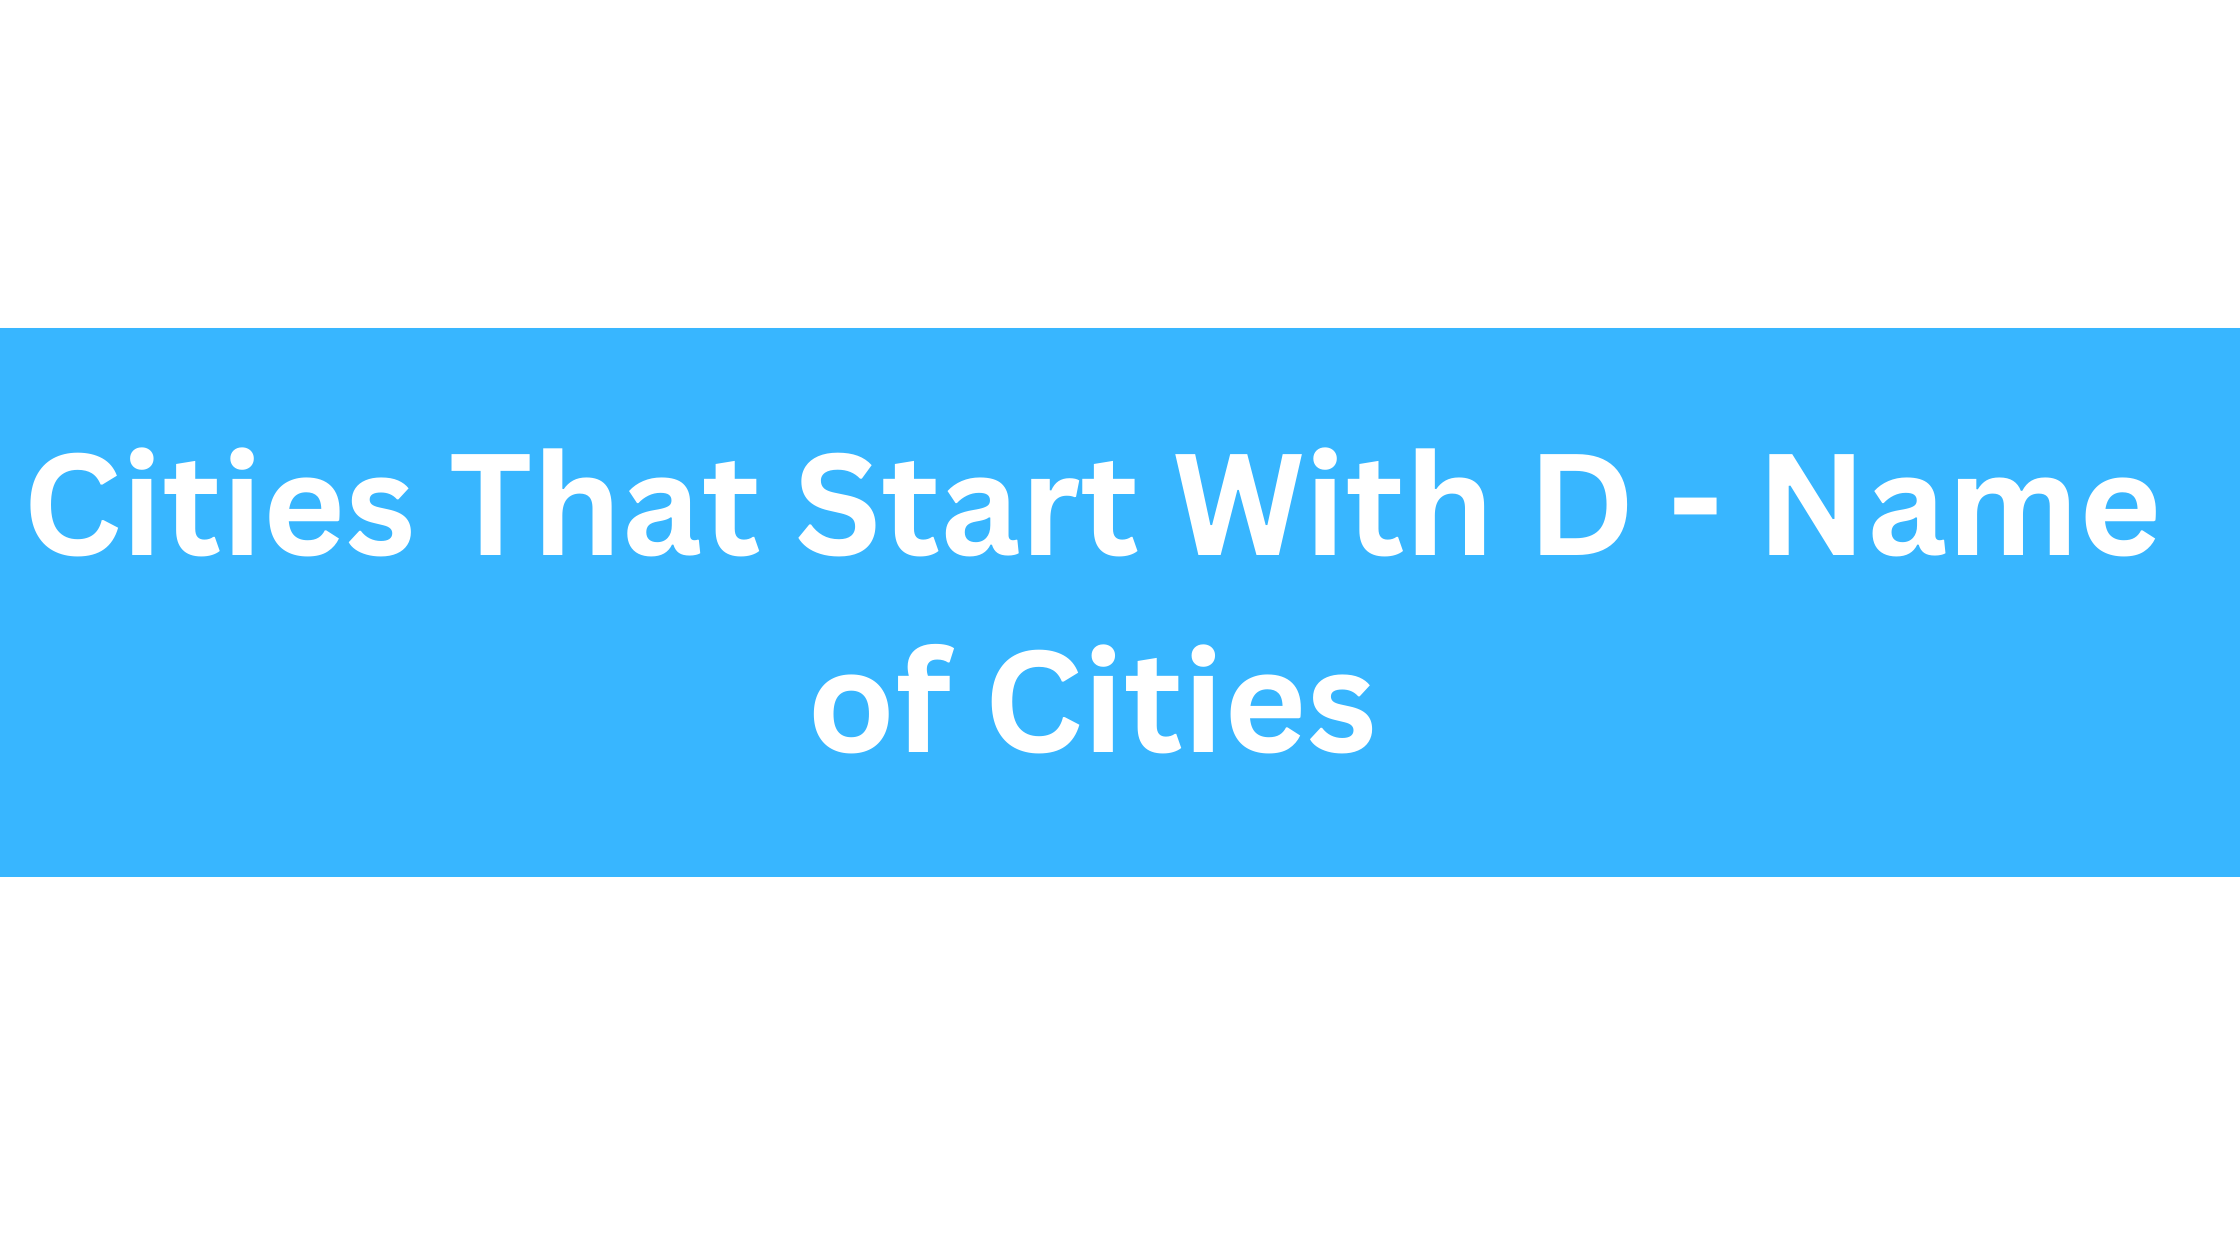 Cities That Start With D